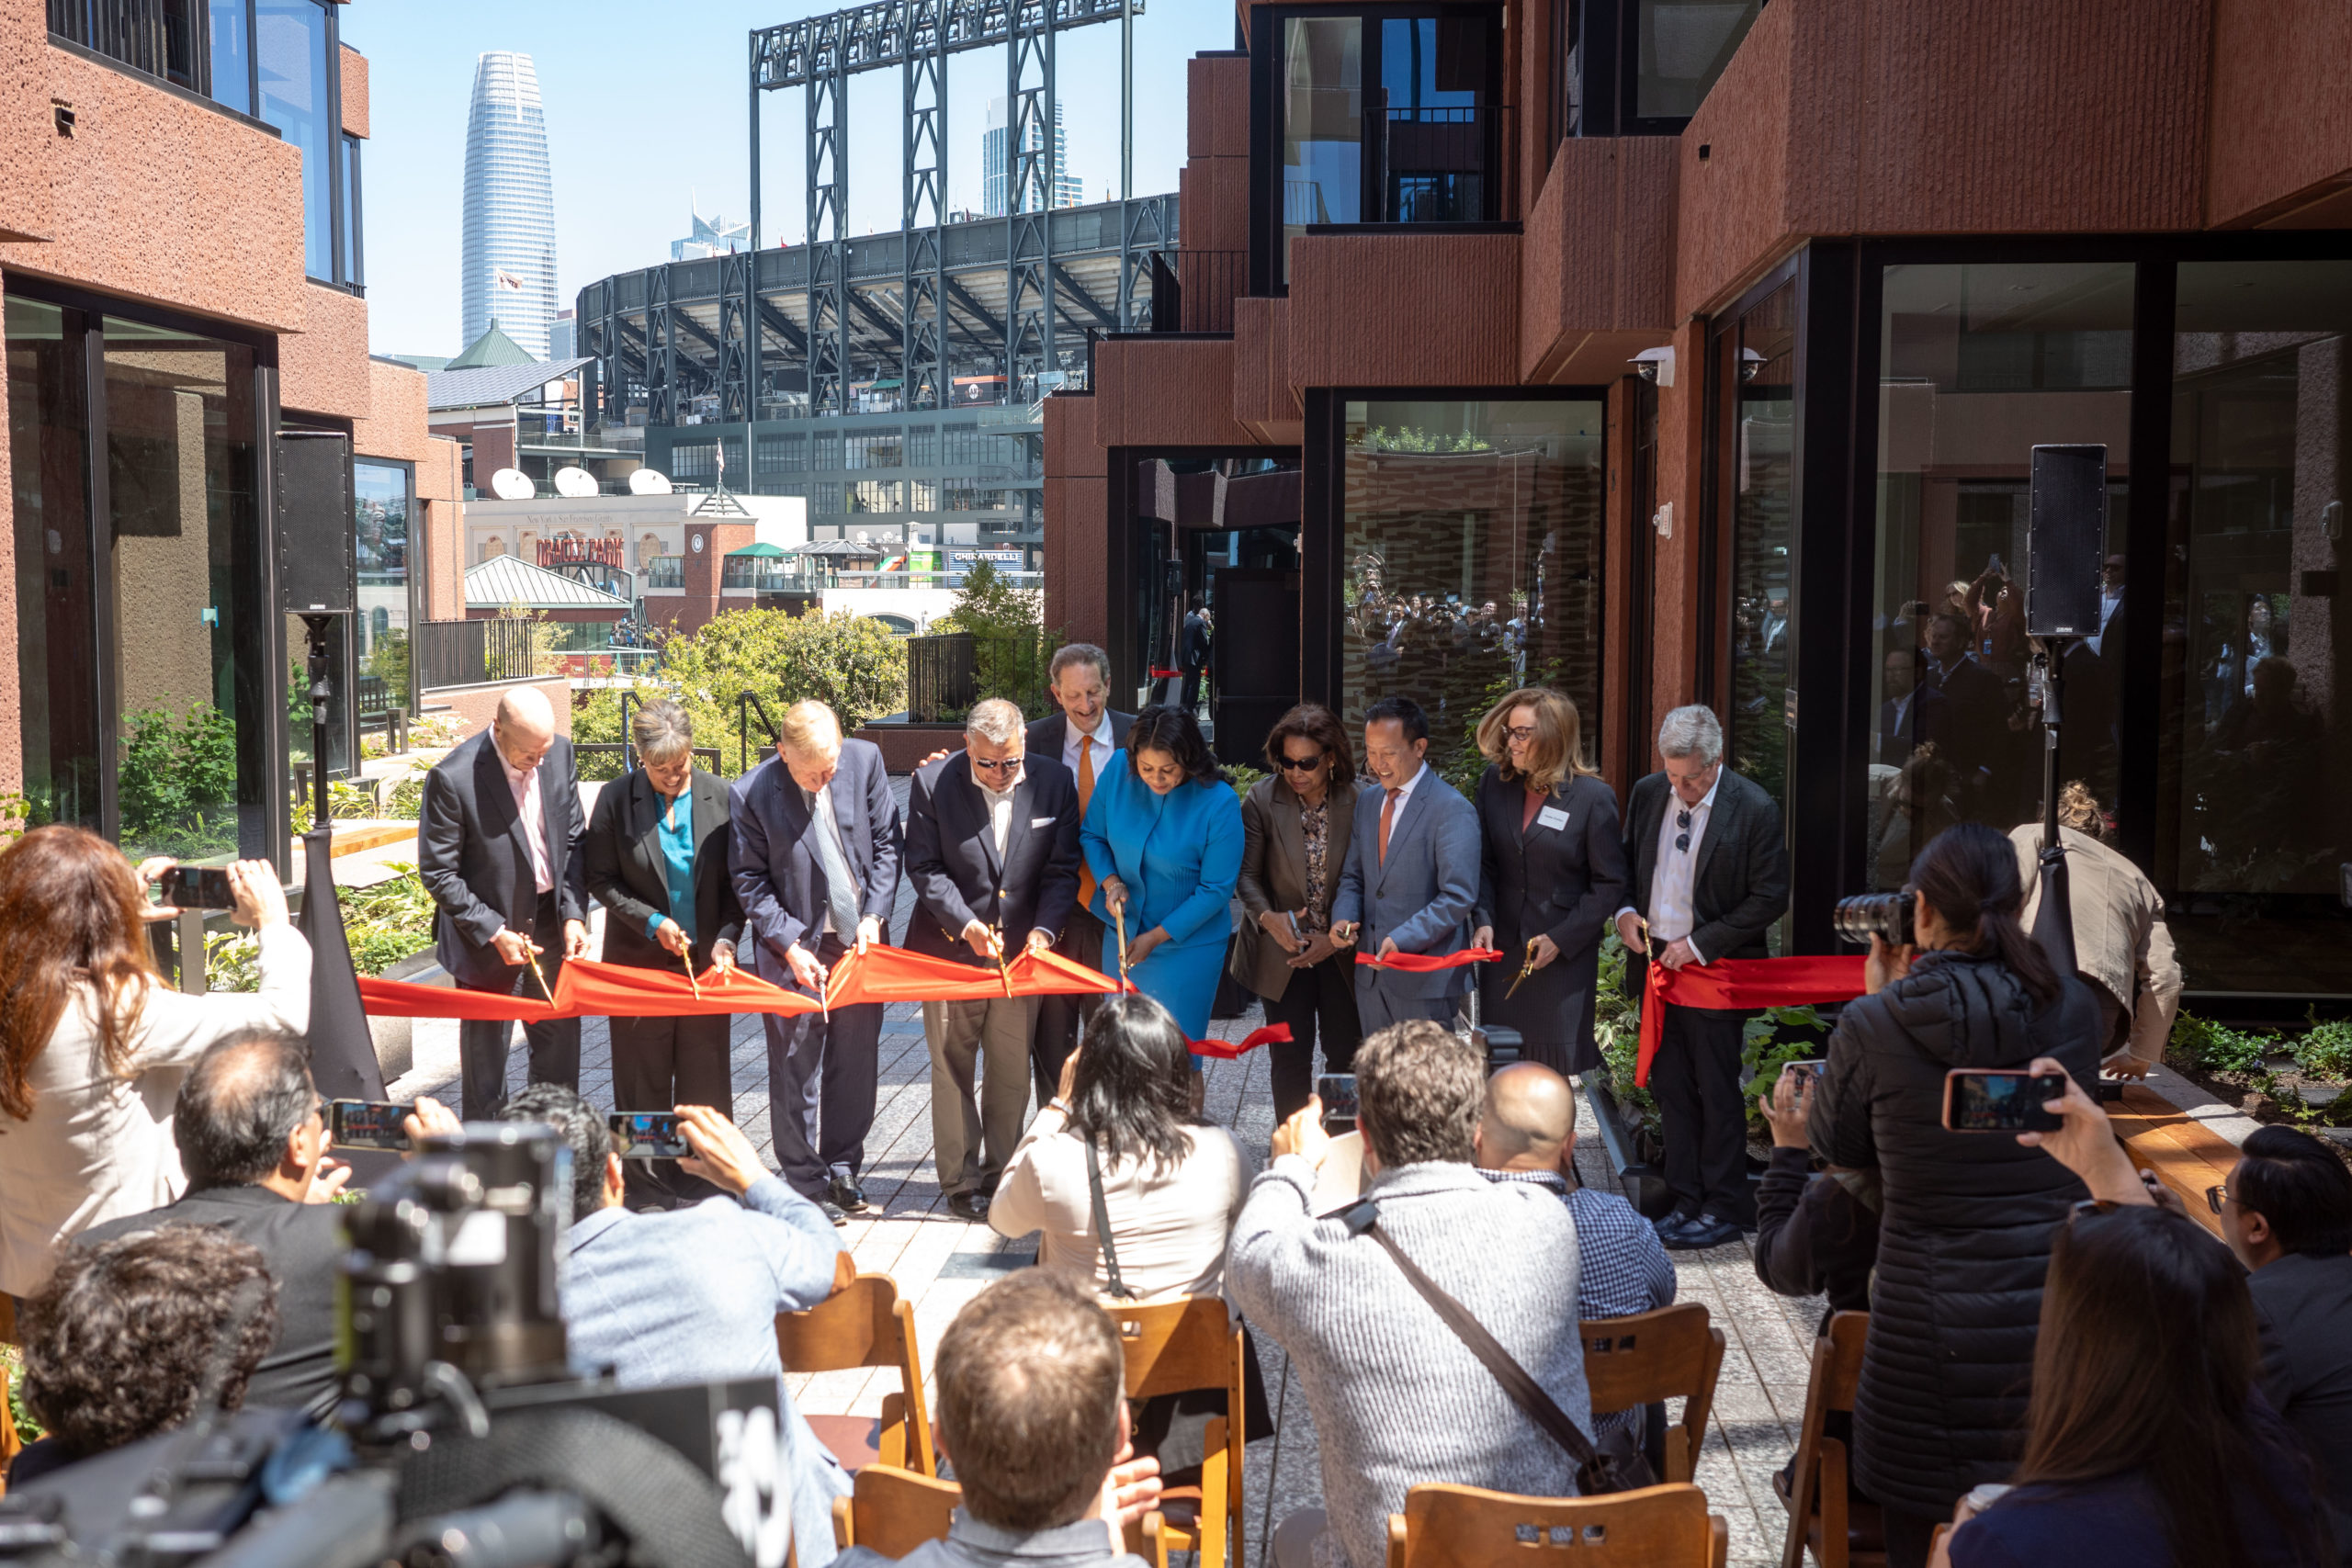 The Canyon ribbon cutting, image by Andrew Campbell Nelson